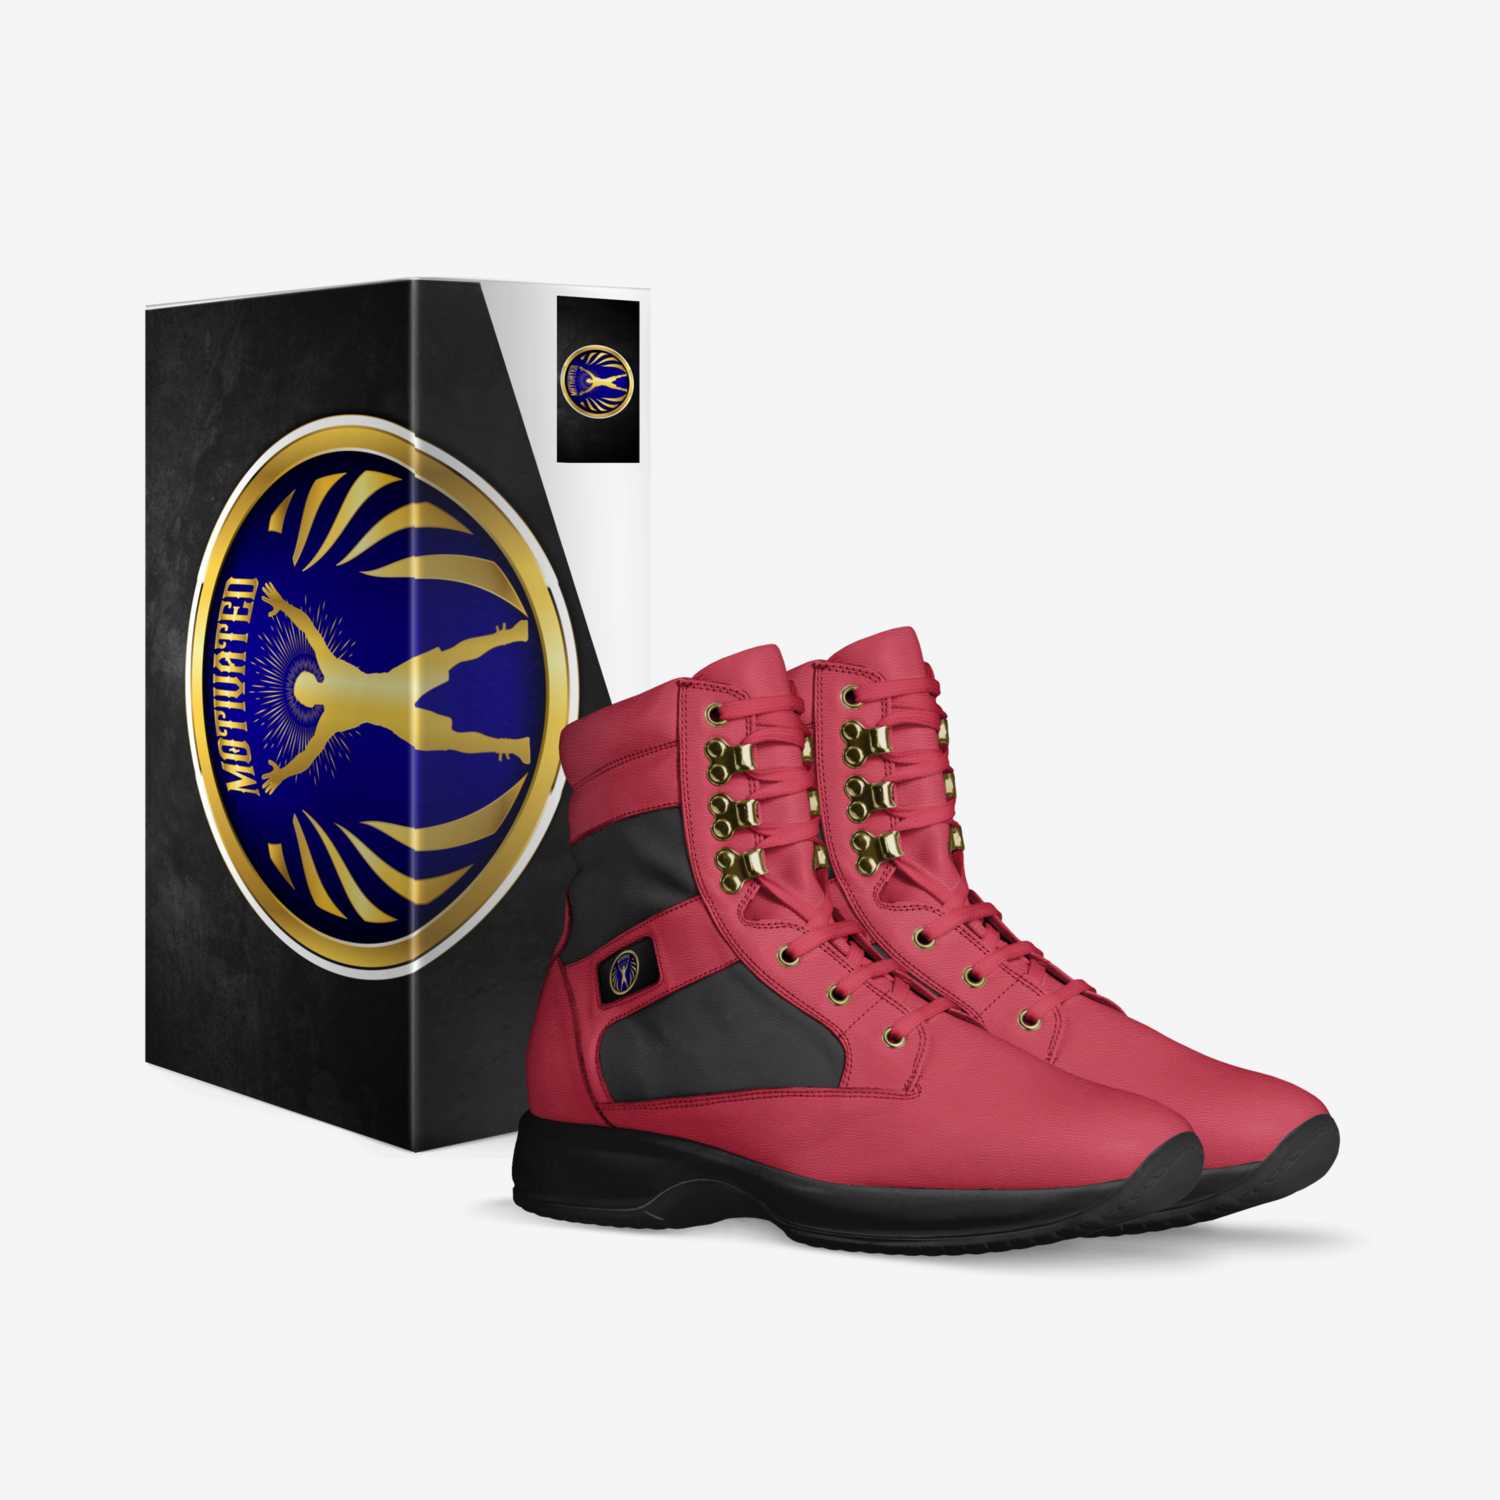 Motivated Xl's V3  custom made in Italy shoes by Stephen Stockett | Box view